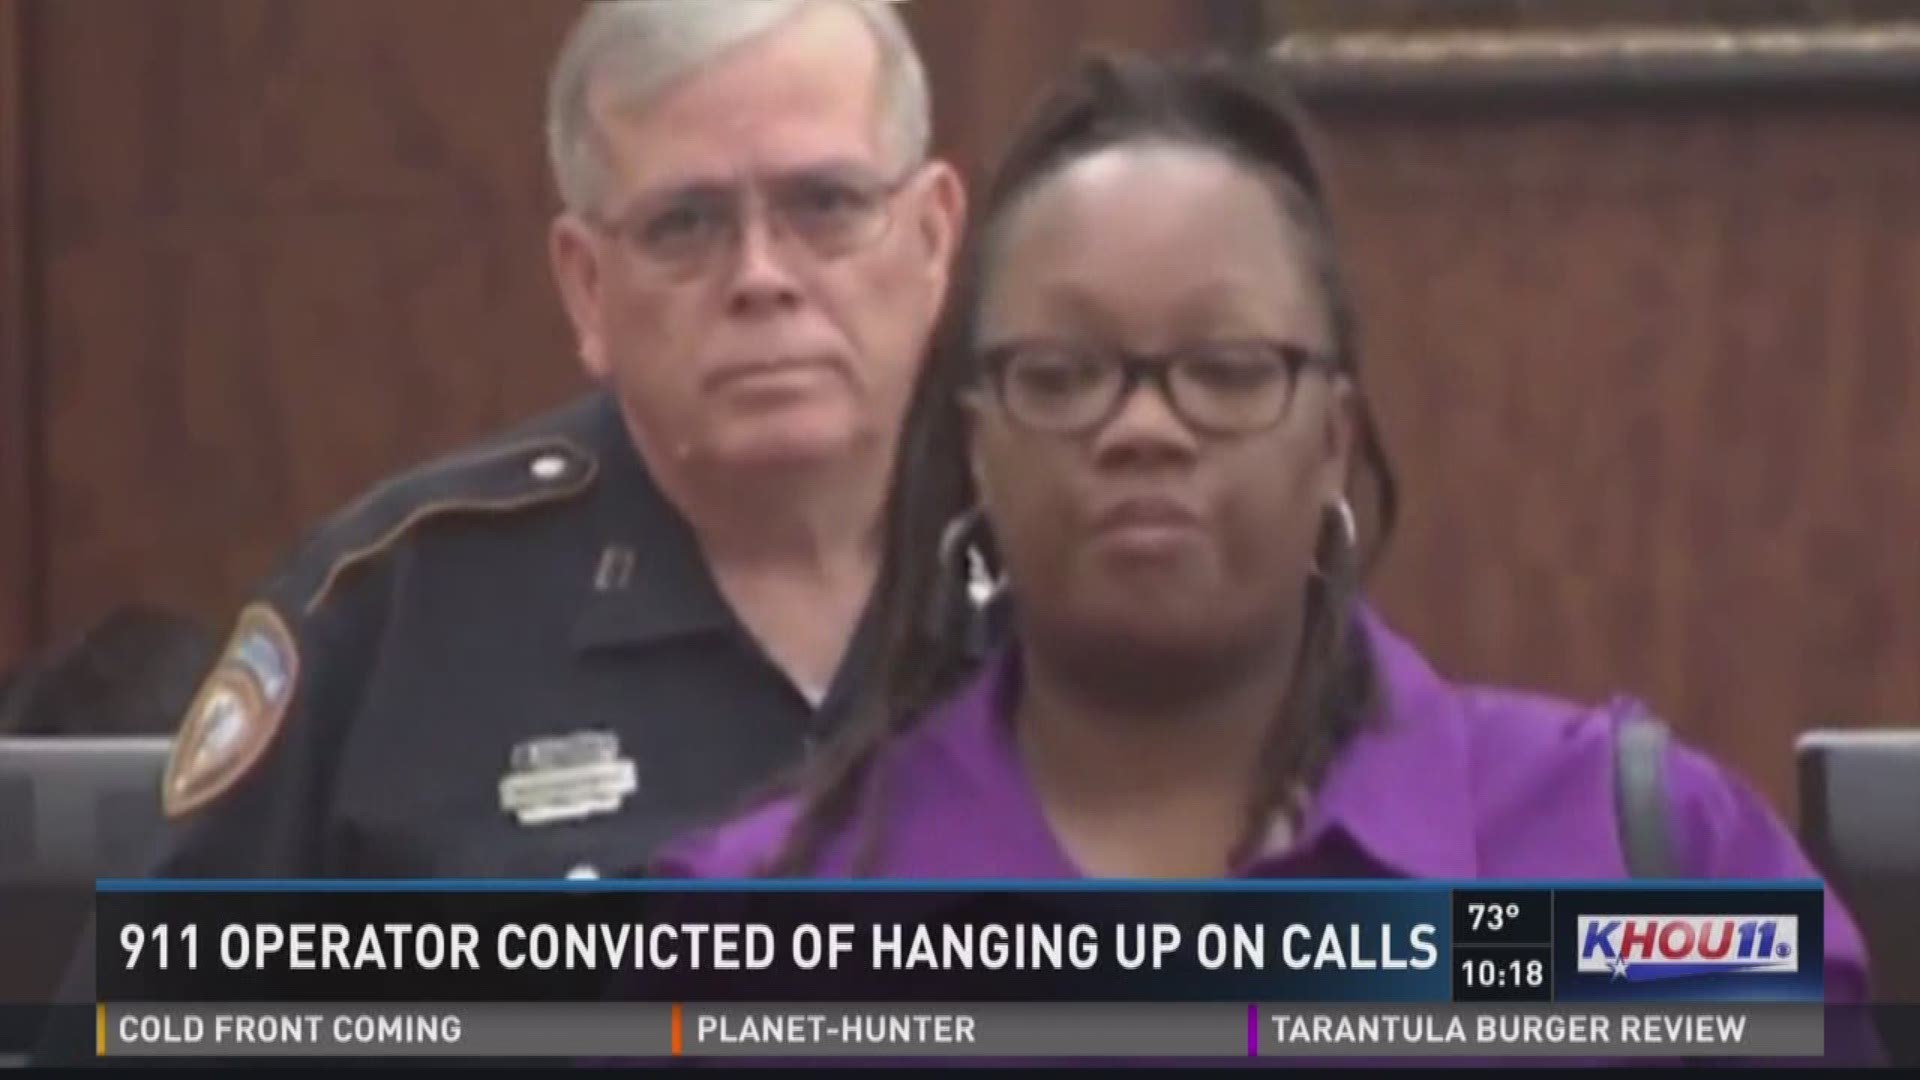 A former 911 operator in Houston was convicted and sentenced Wednesday for hanging up on people calling to report an emergency.